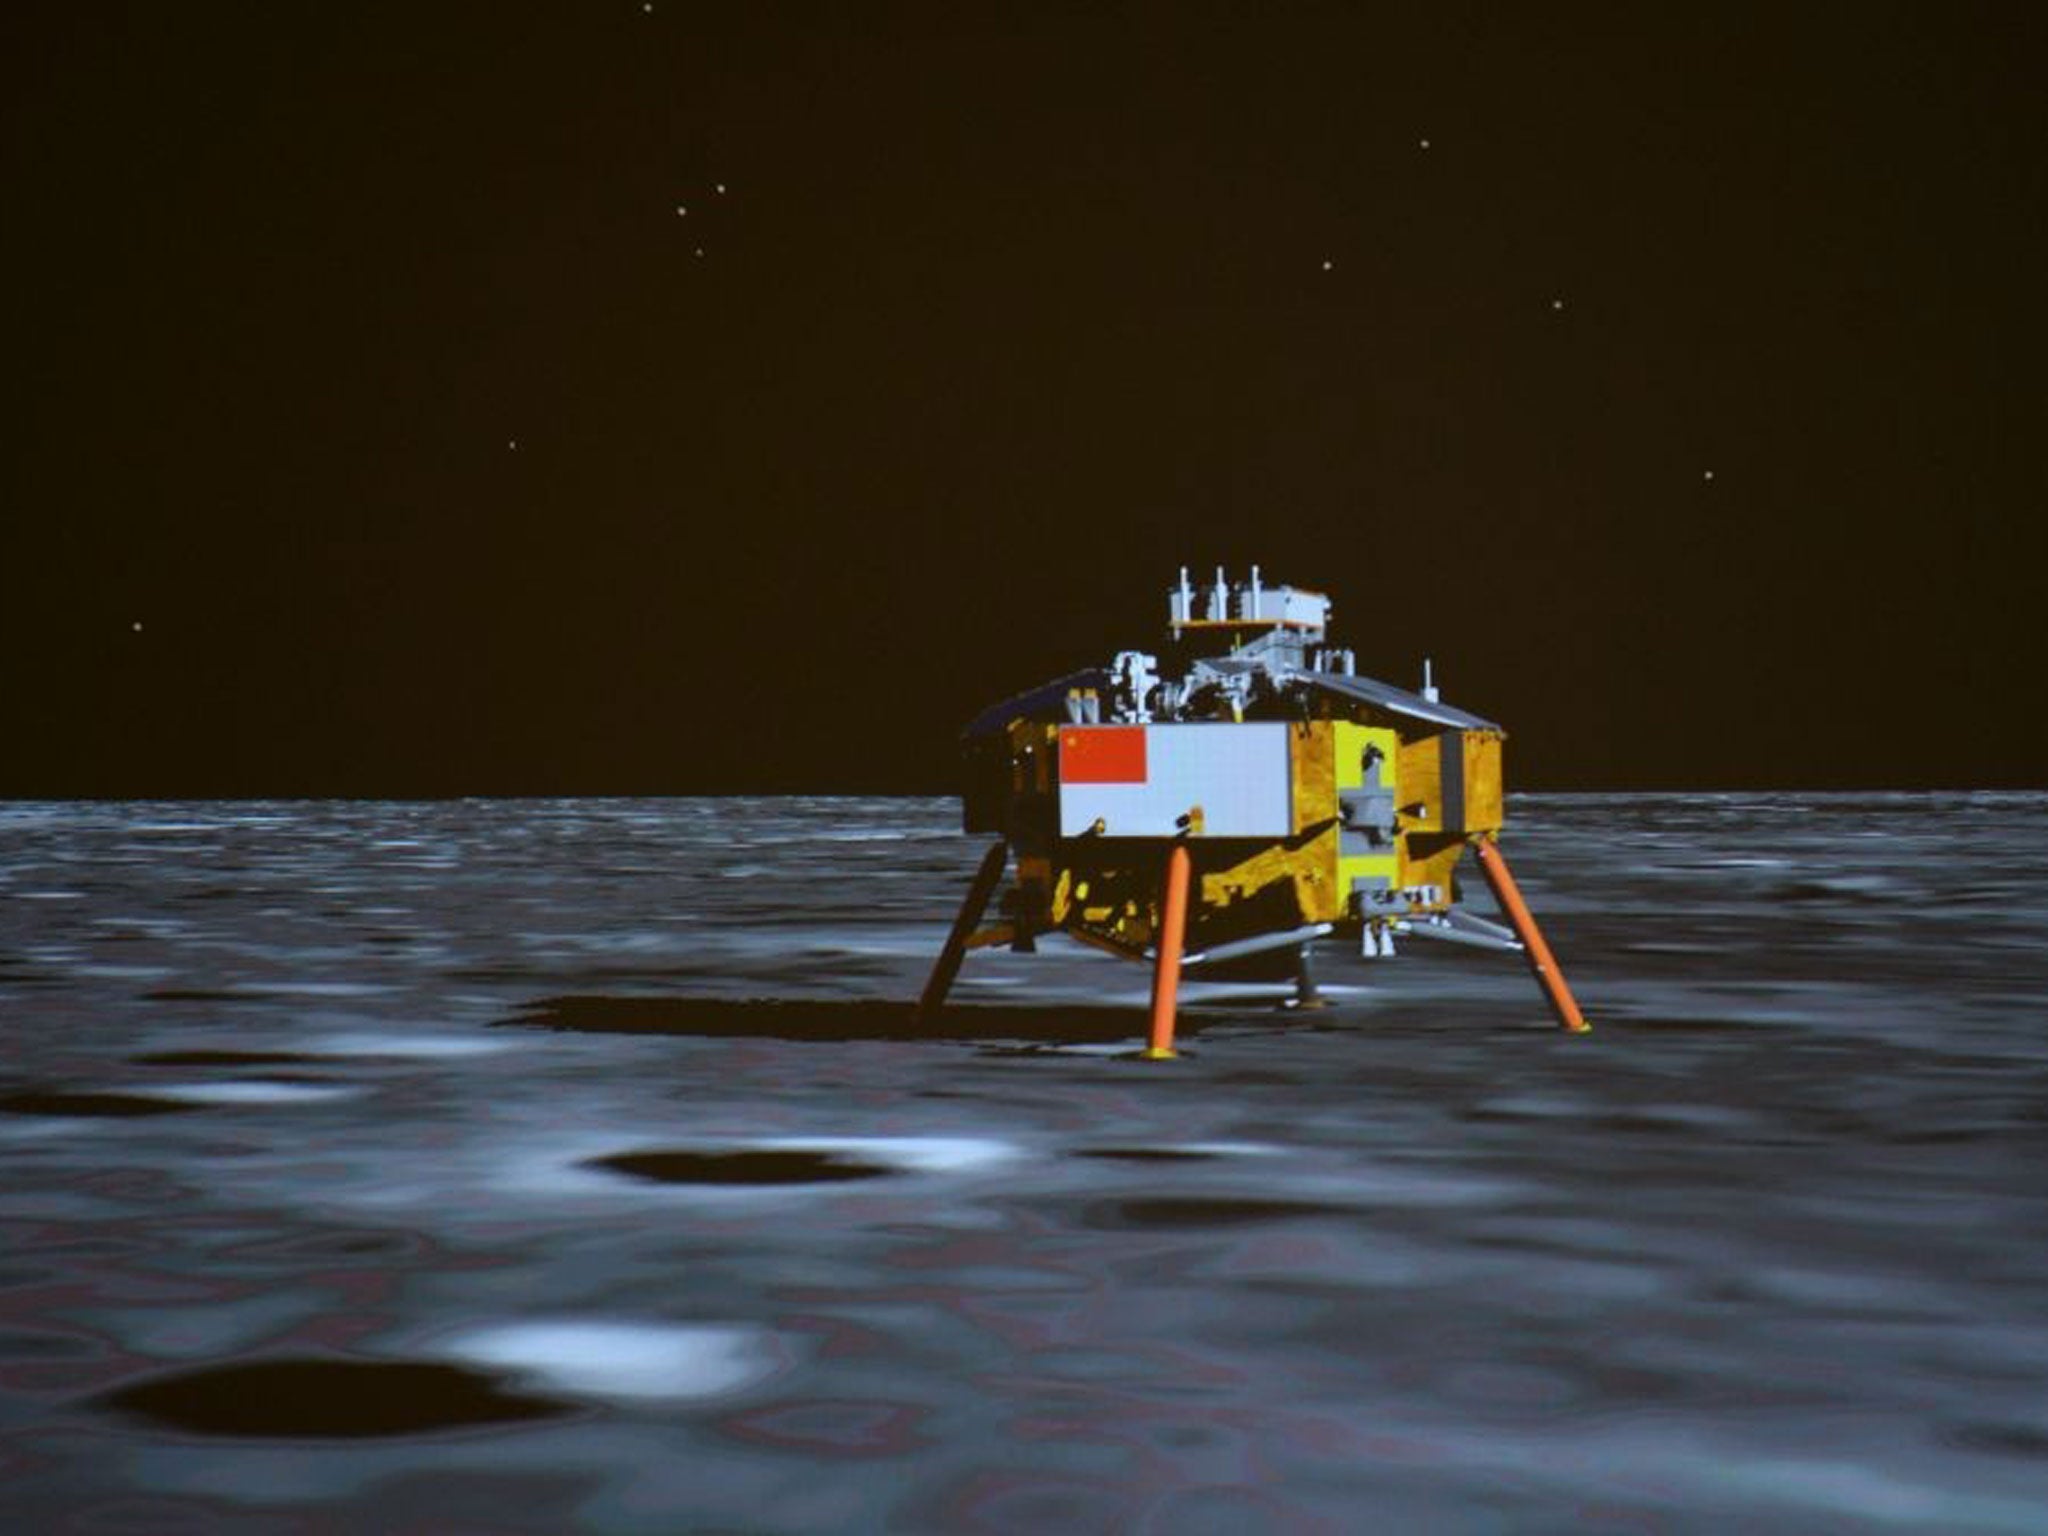 Chinese pride: The lunar probe Chang’e-3 landed on the Moon yesterday